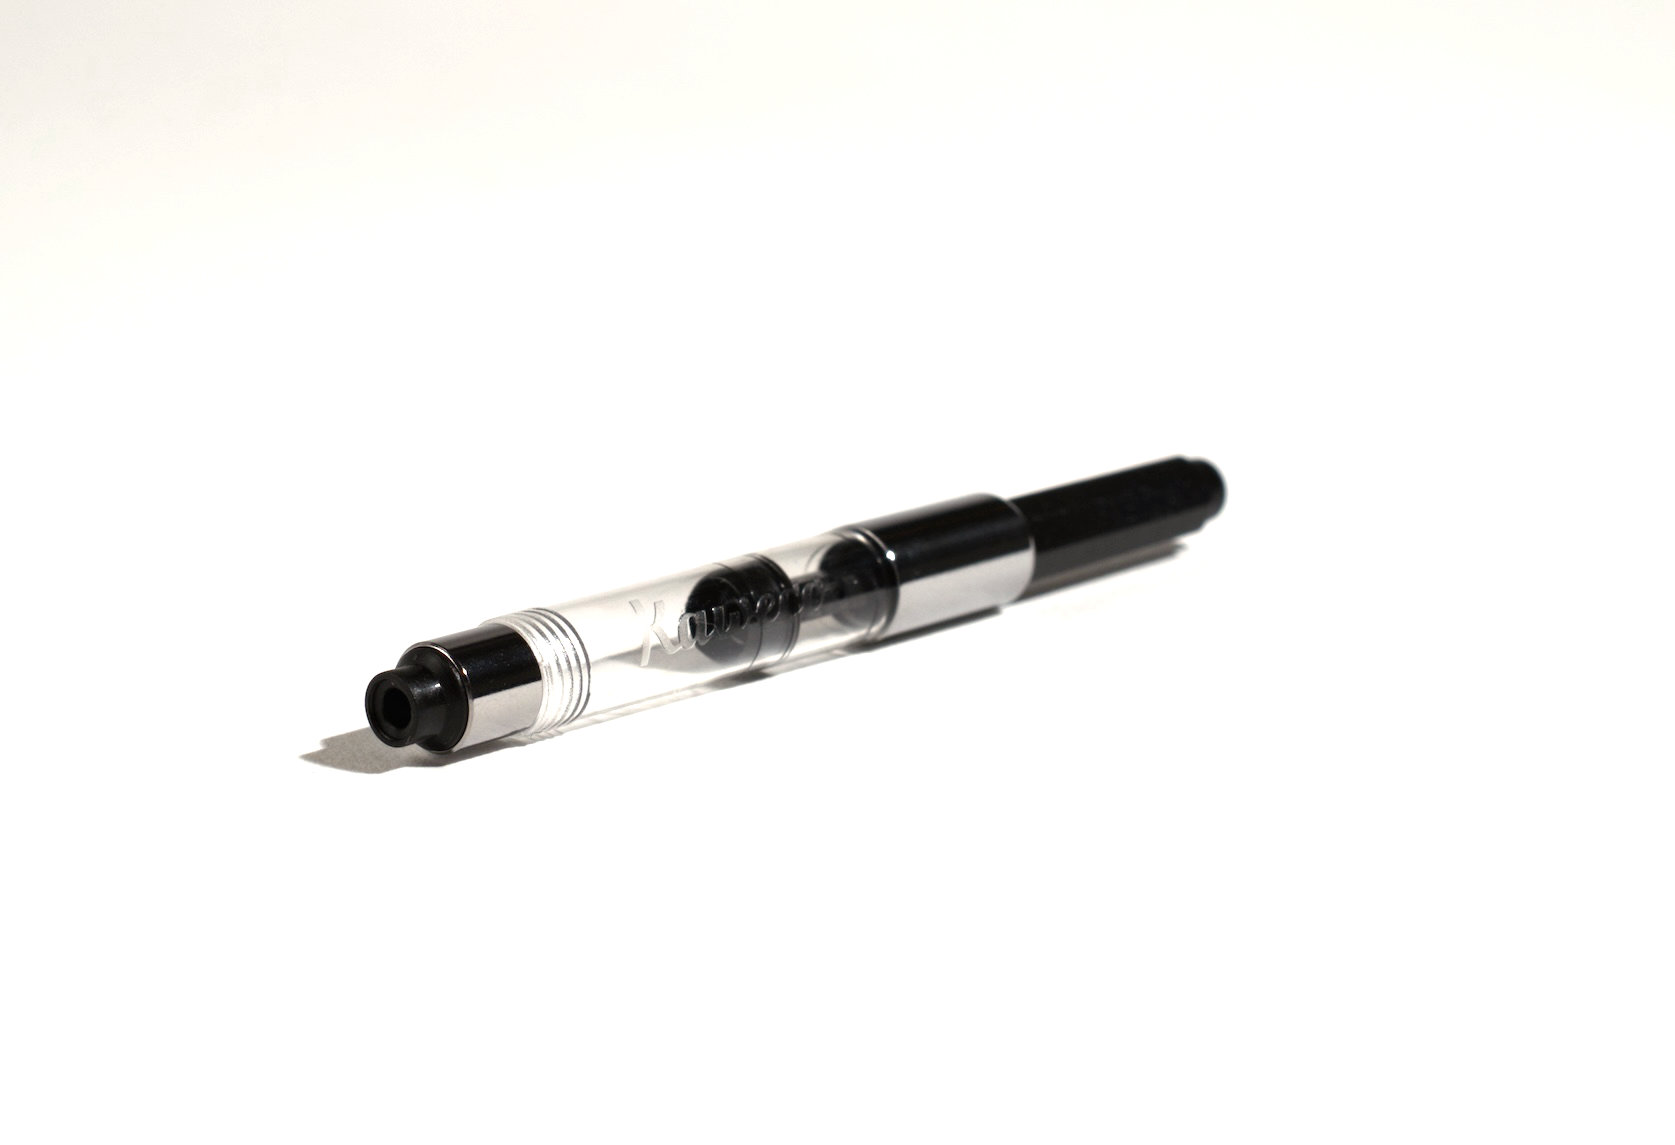 Kaweco Standard fountain pen converter with chrome-coloured accents.